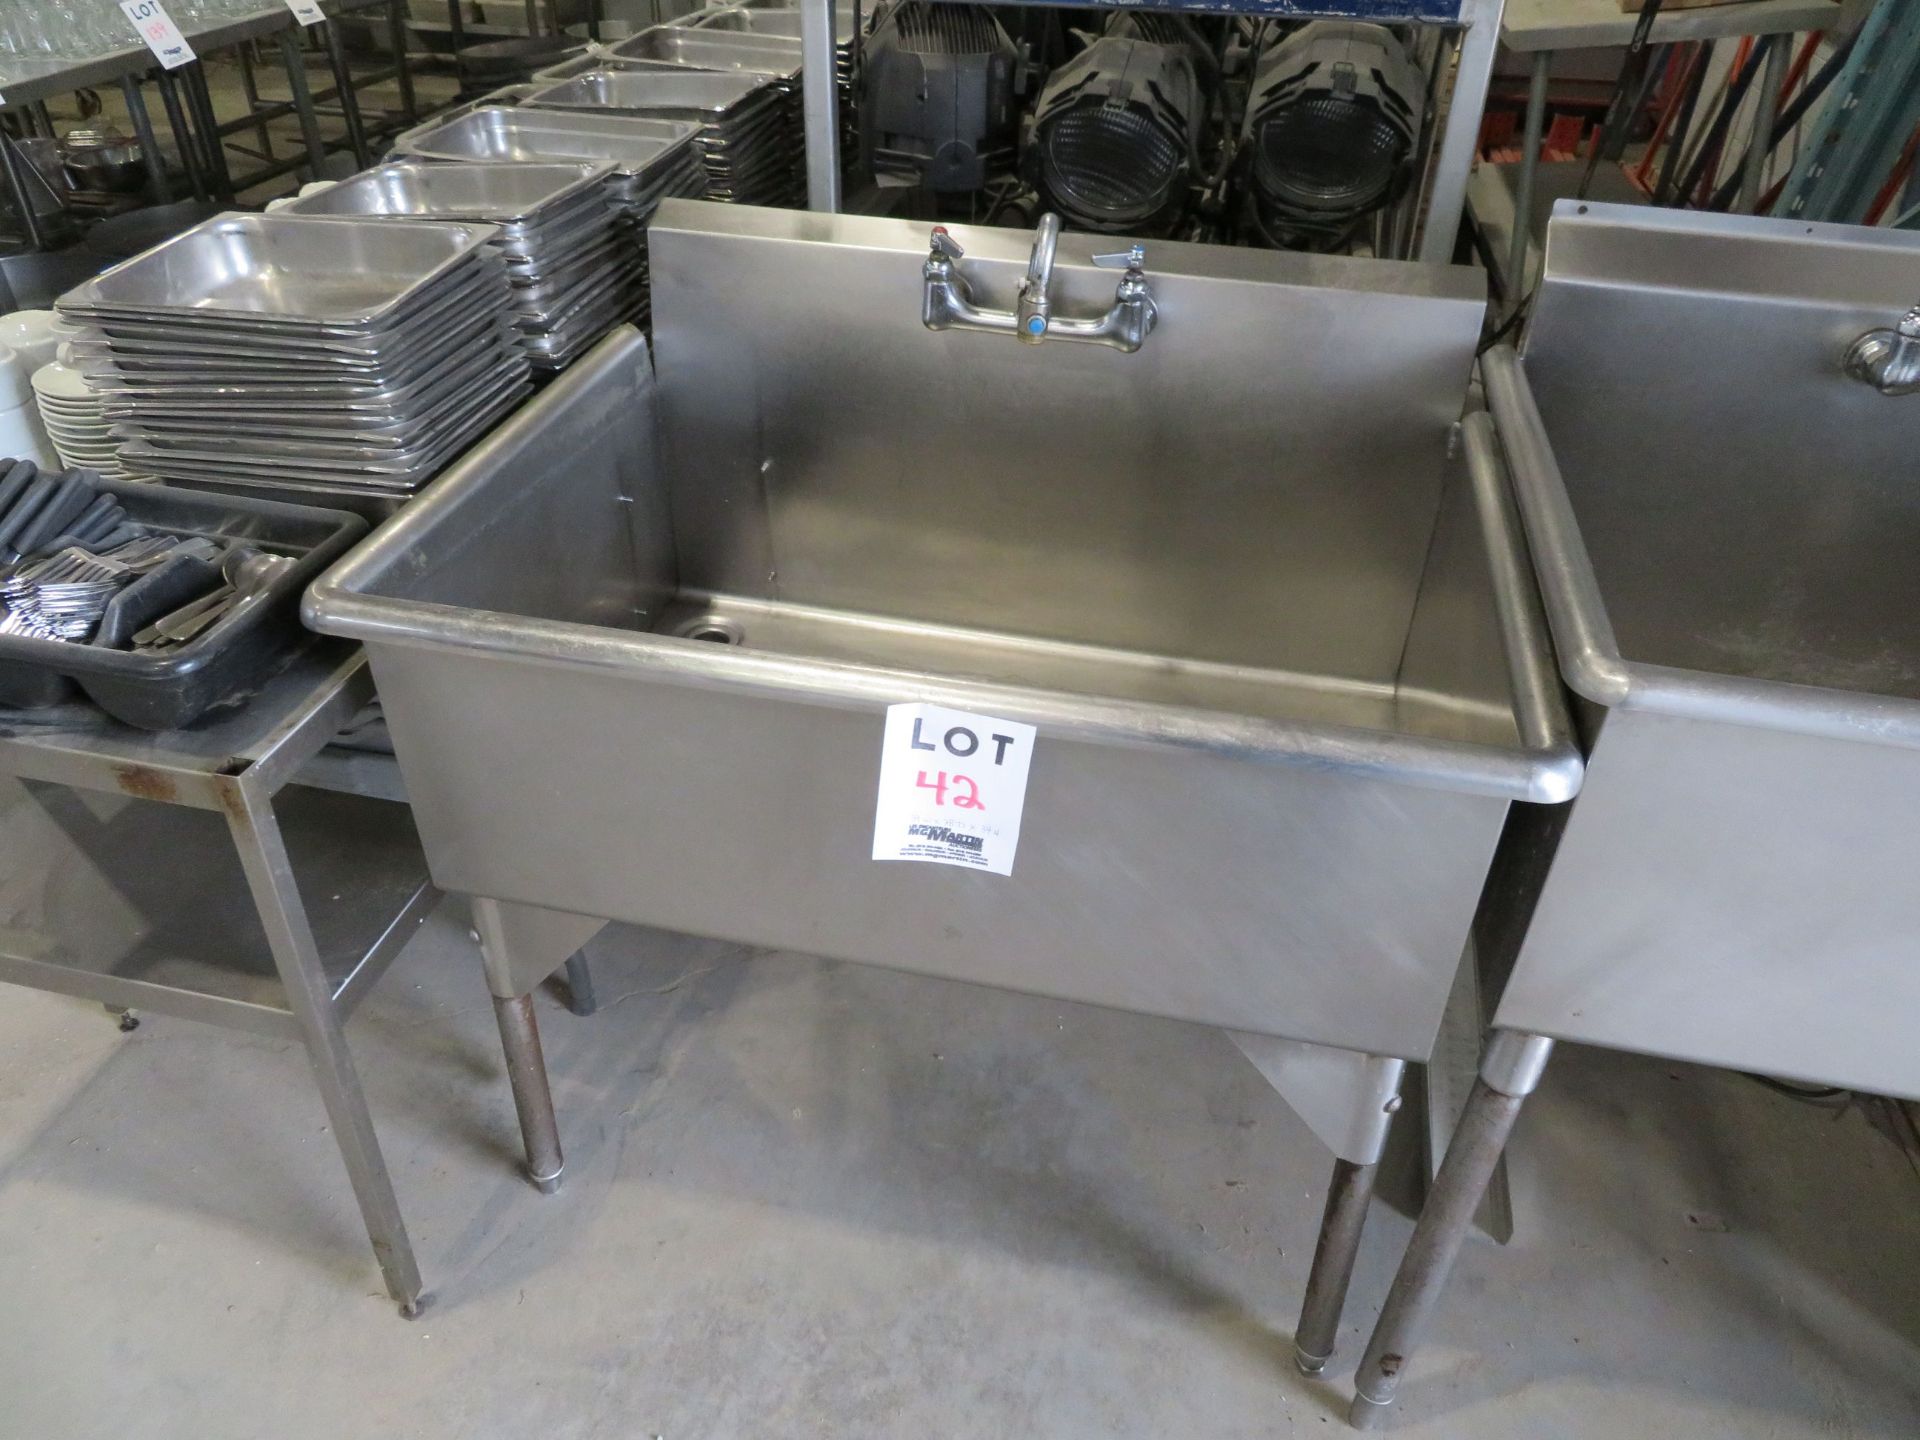 Stainless steel sink approx. 39"w x 28"d x 34"h